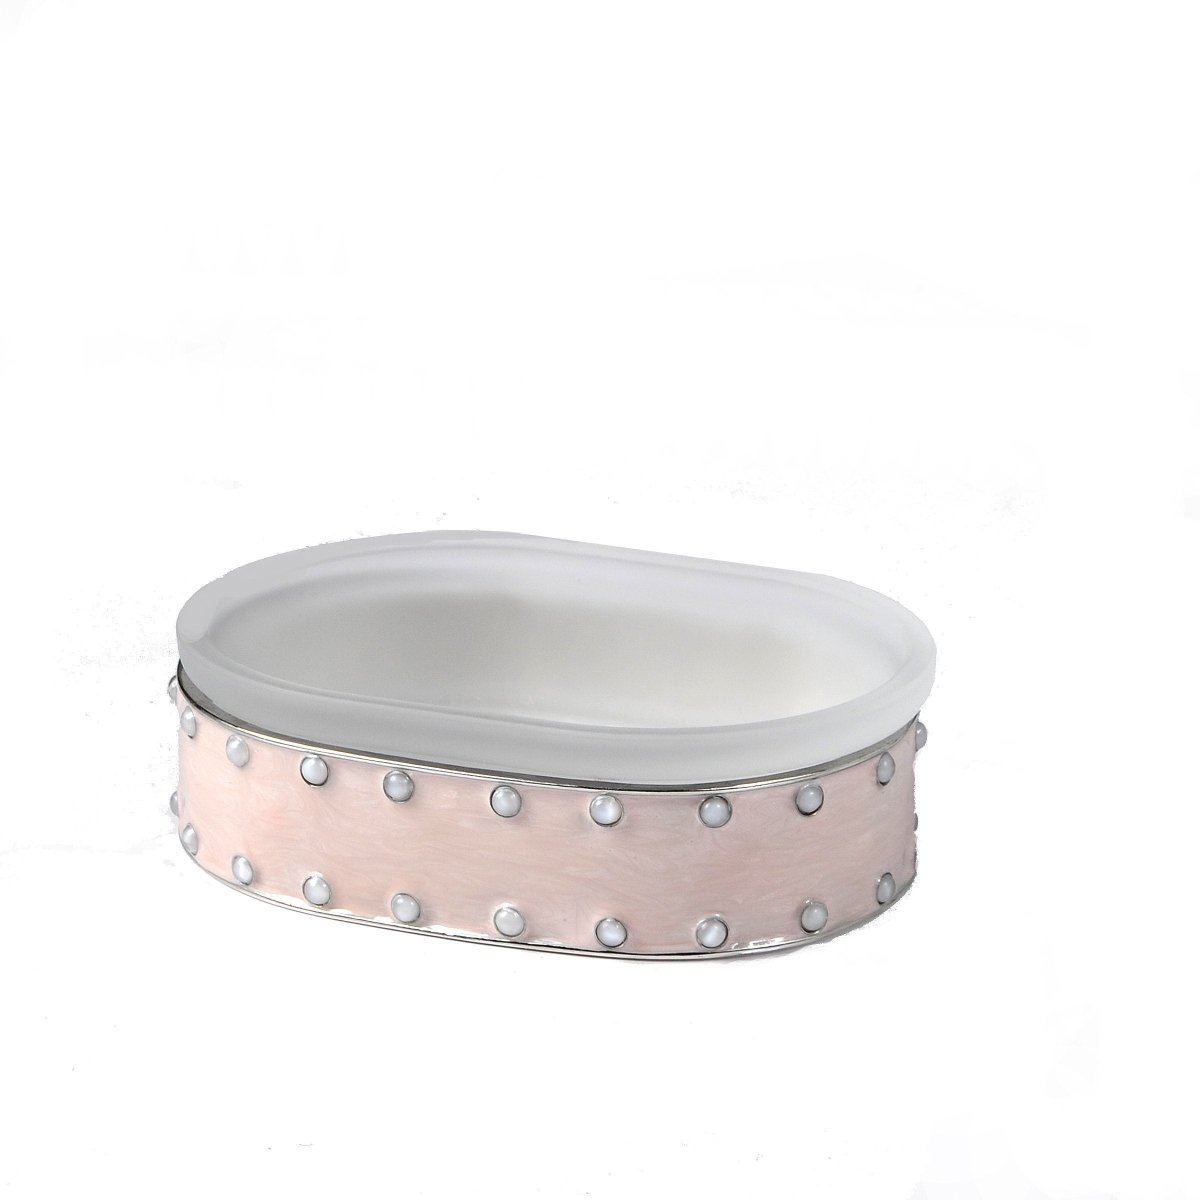 Fig Linens - Mike + Ally Aero Pink Bath Accessories - Oval Soap Dish